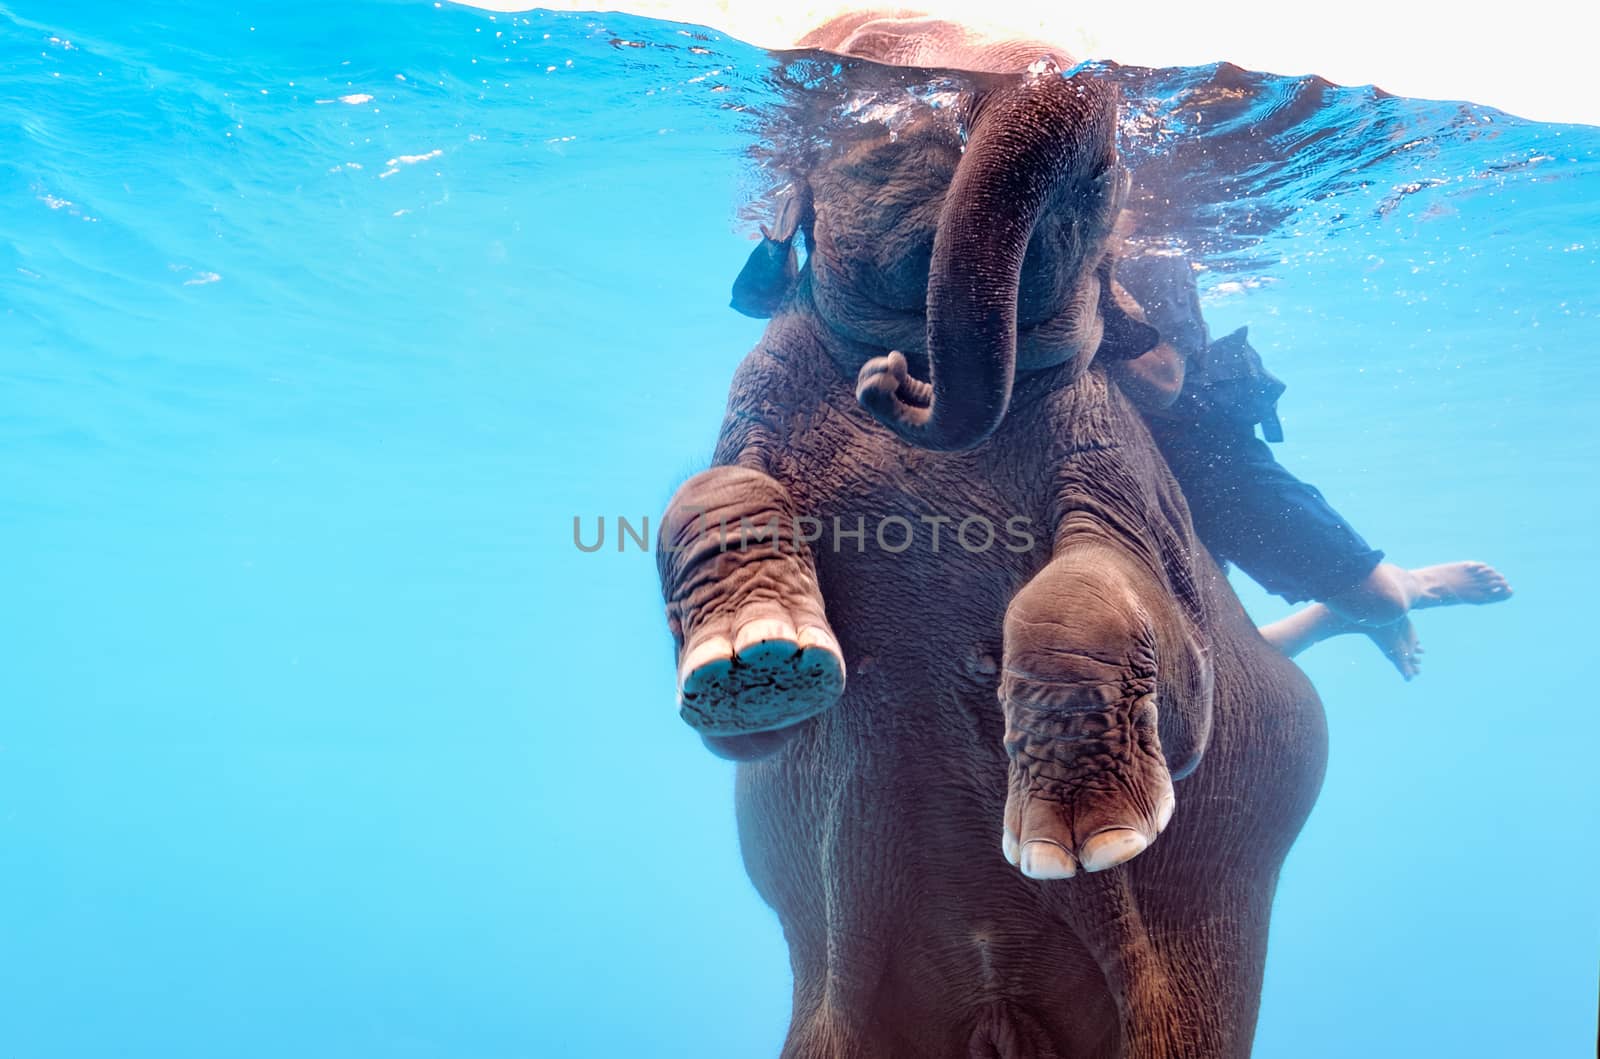 Elephant show swimming and blow the bubbles out of the trunk underwater in Thailand.